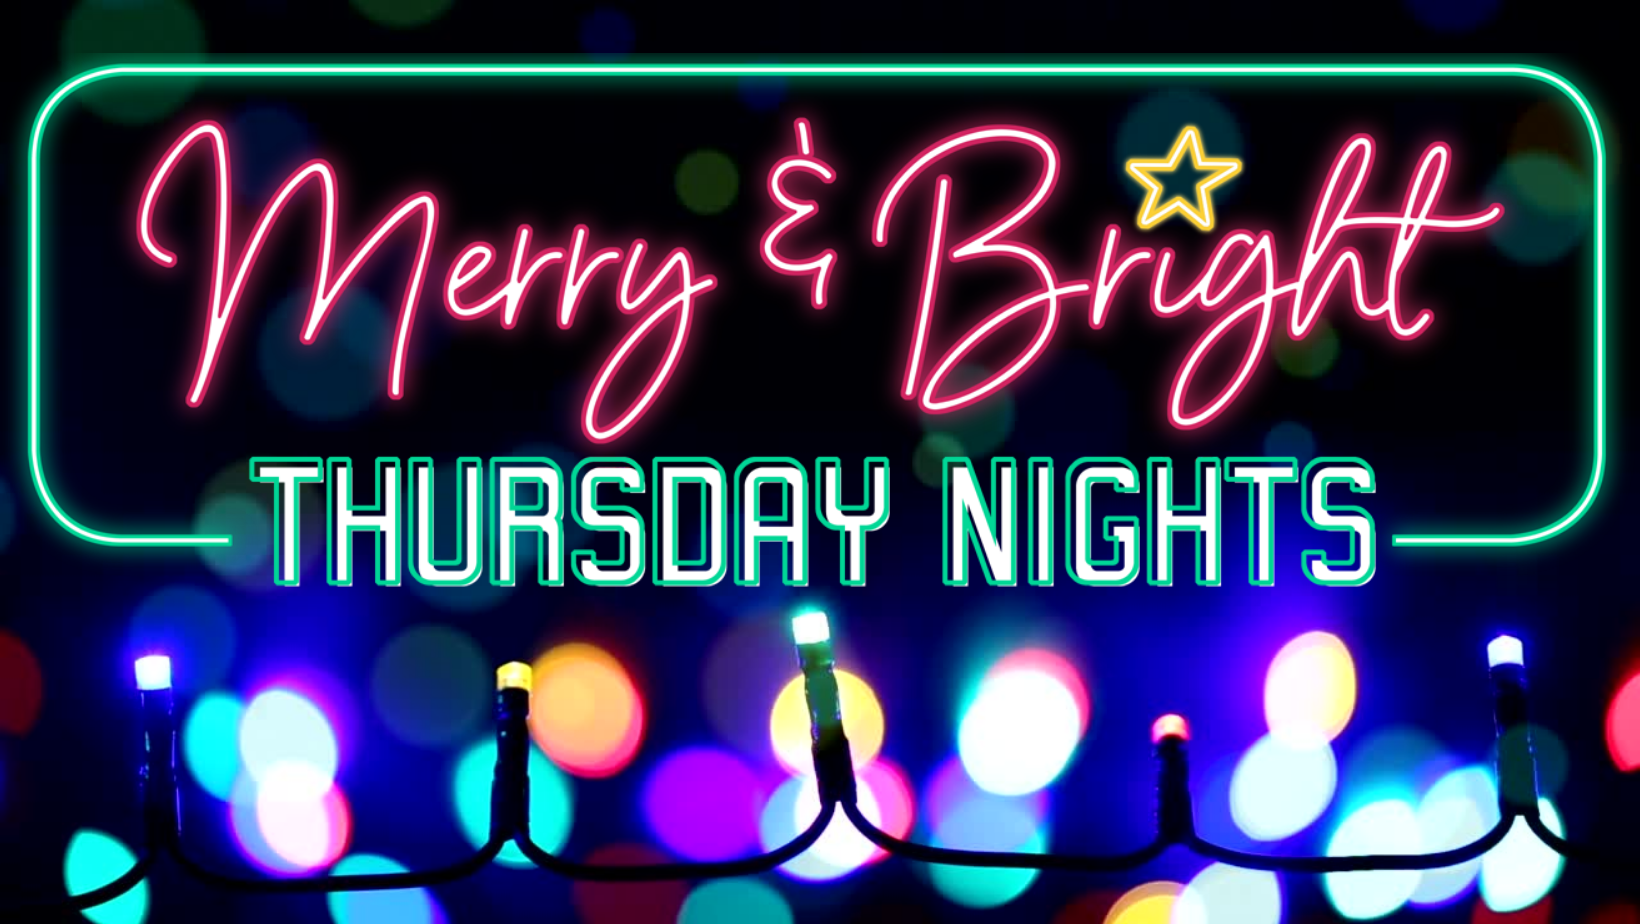 Copy of merry and bright thursday